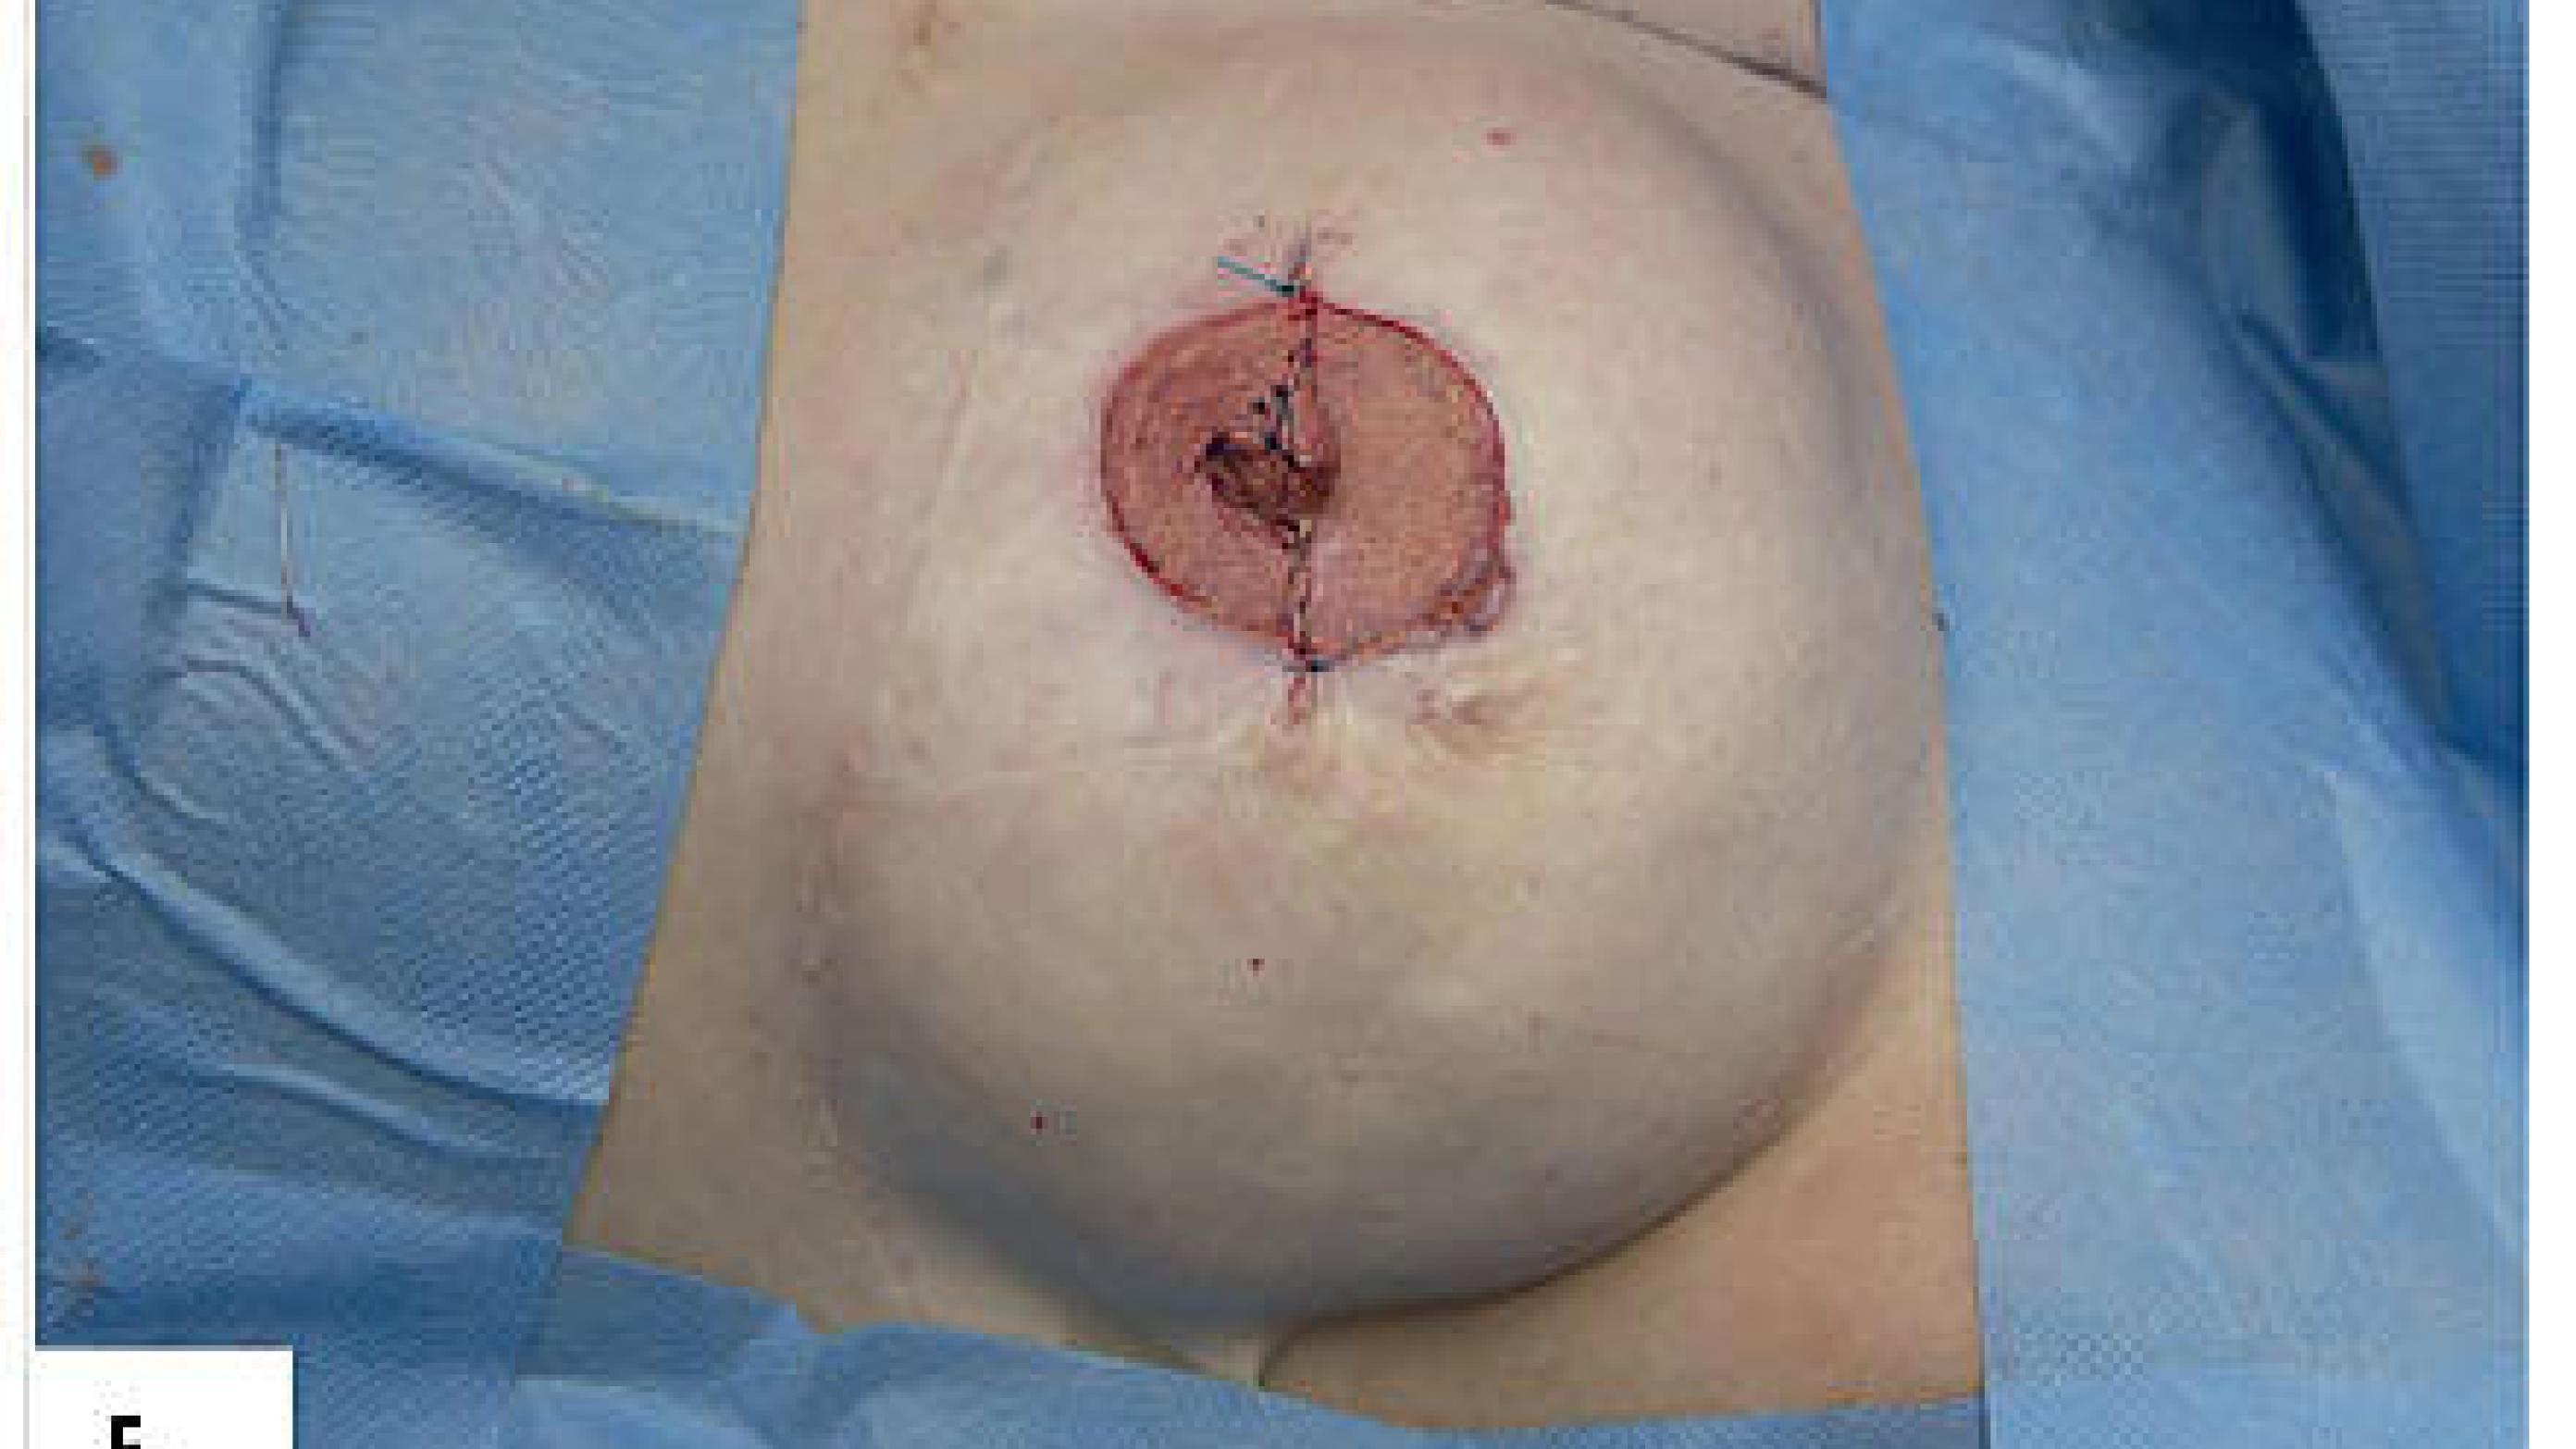 The nipple is reconstructed and the donor defect is closed.